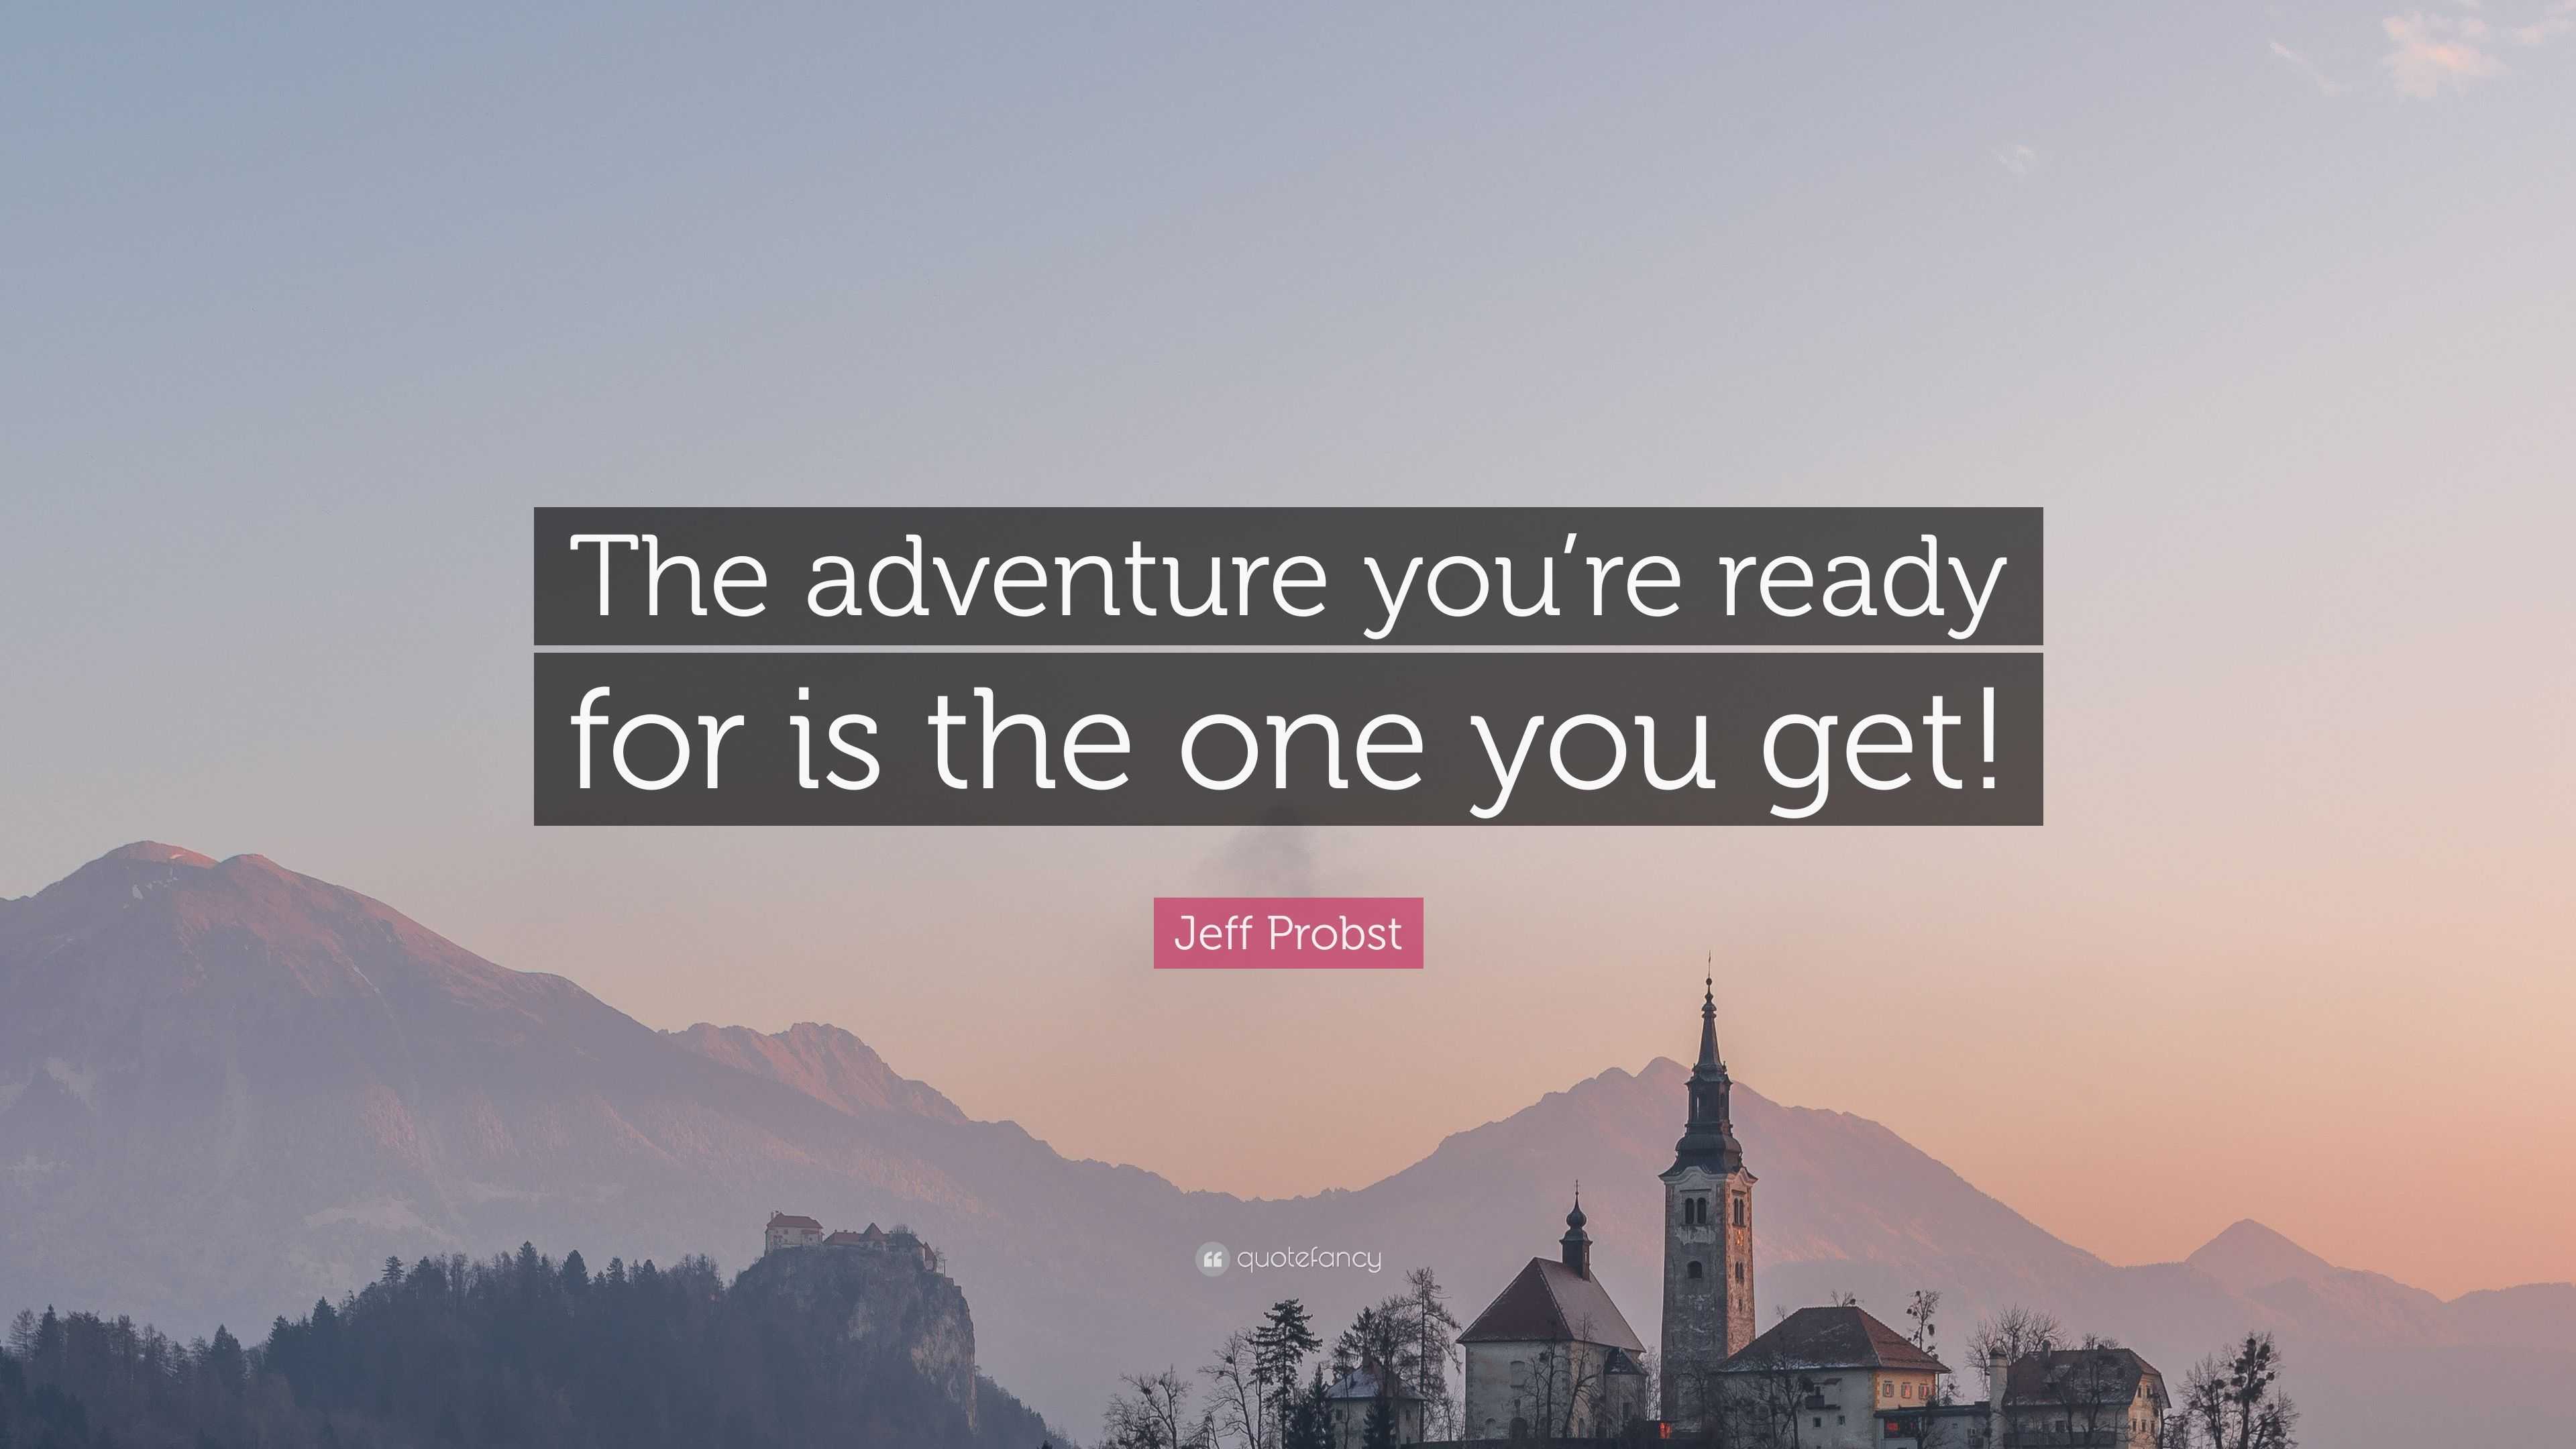 Jeff Probst Quote: “The adventure you're ready for is the one you get!”